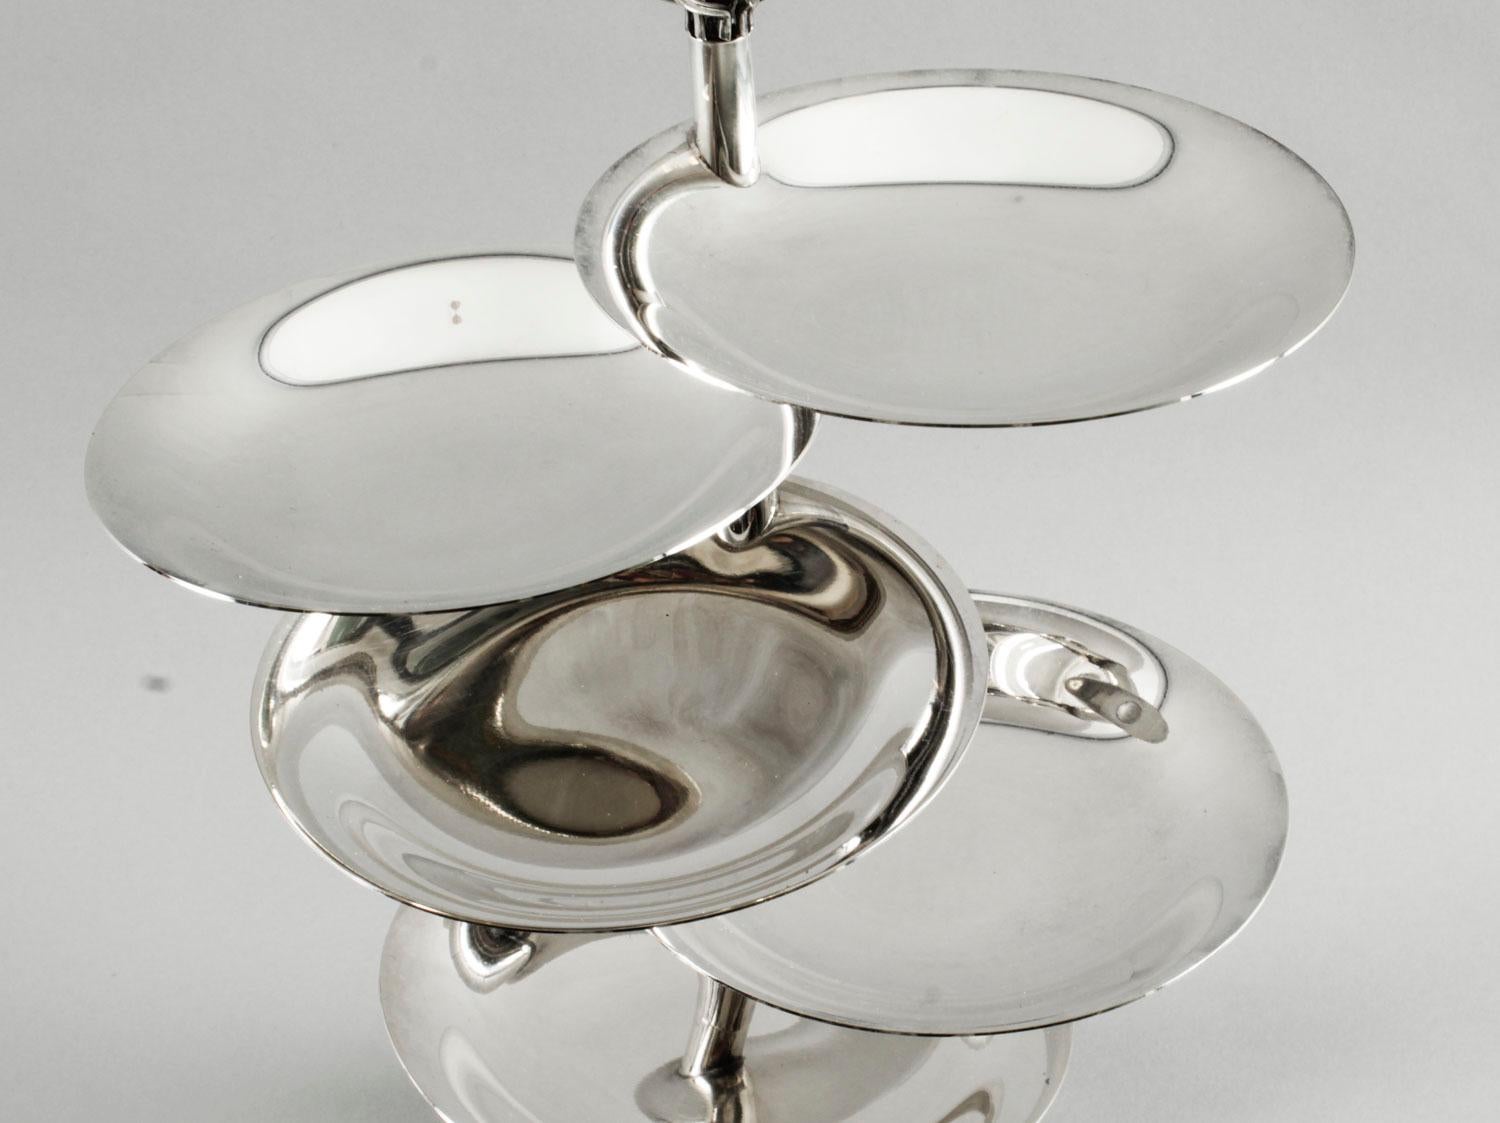 Fin du XIXe siècle Antique Silver Plated Hors d'oeuvres Stand by Christofle 19th C. en vente